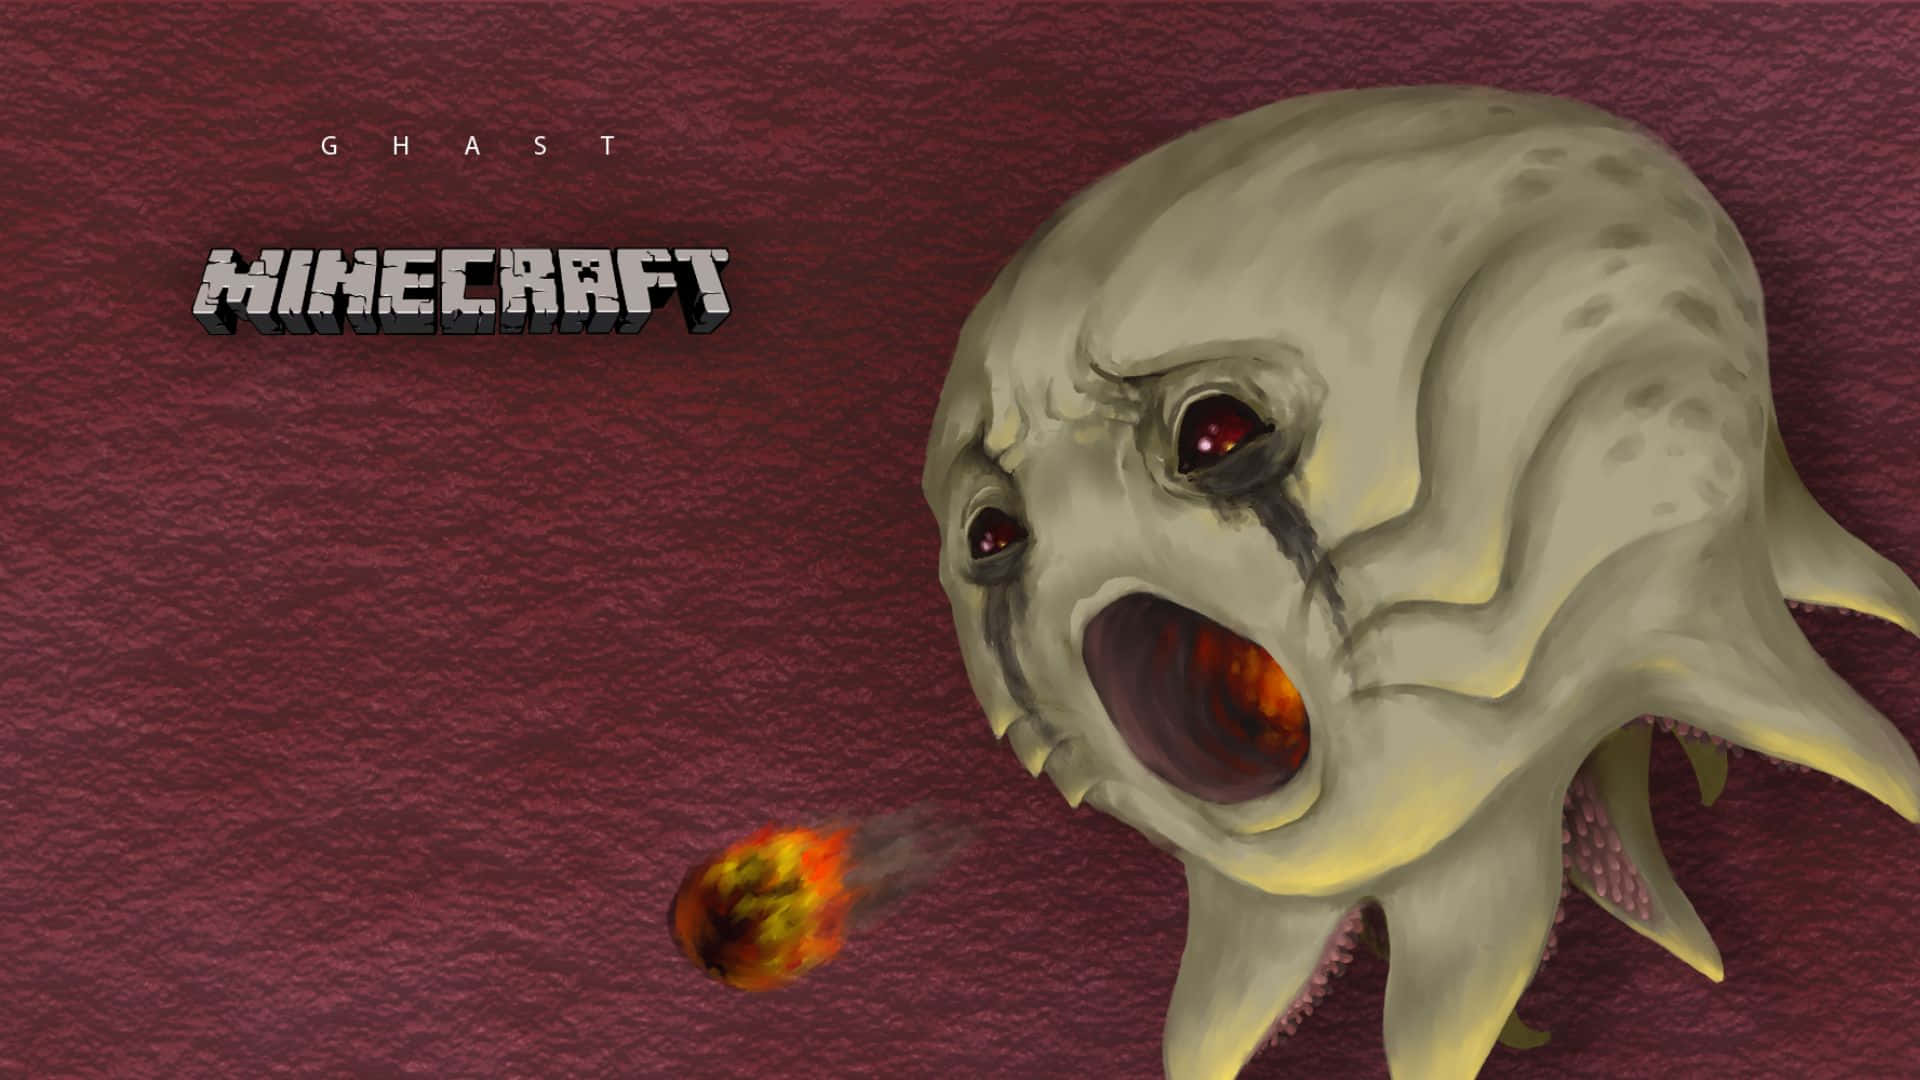 The Terrifying Ghast Lurks in the Nether Dimension of Minecraft Wallpaper